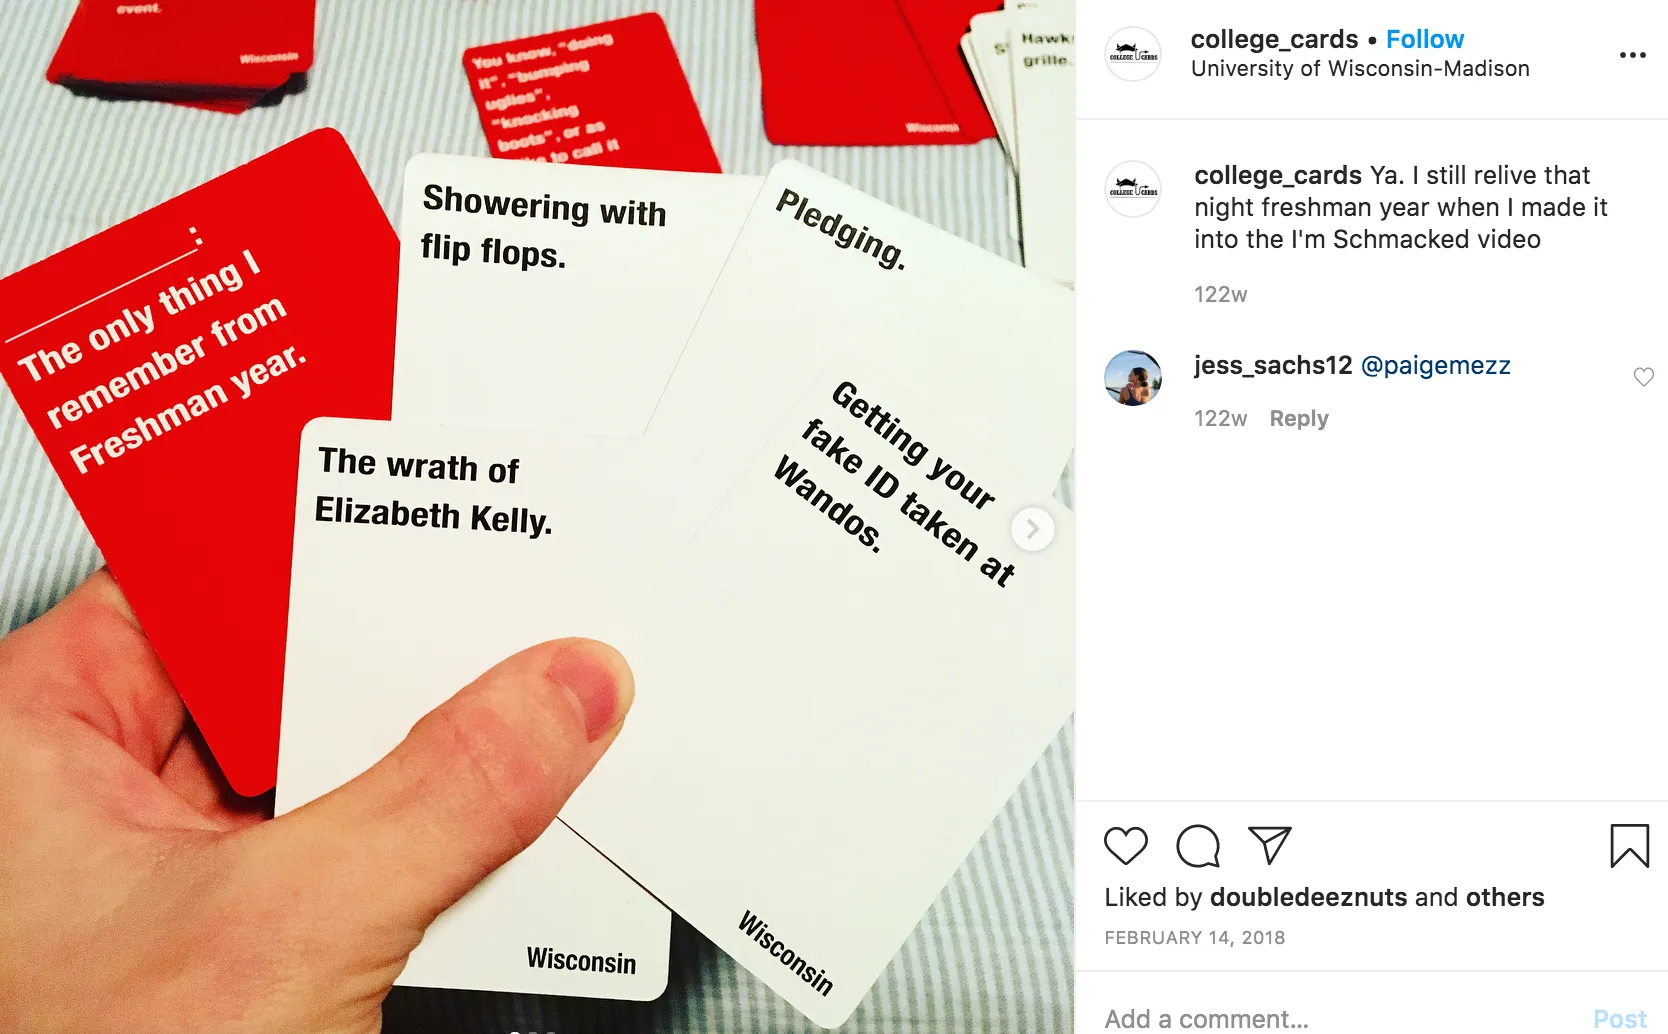 /how-i-localized-cards-against-humanity-gamed-instagram-made-dollar13000-and-got-shut-down-by-university-n97y3y7s feature image